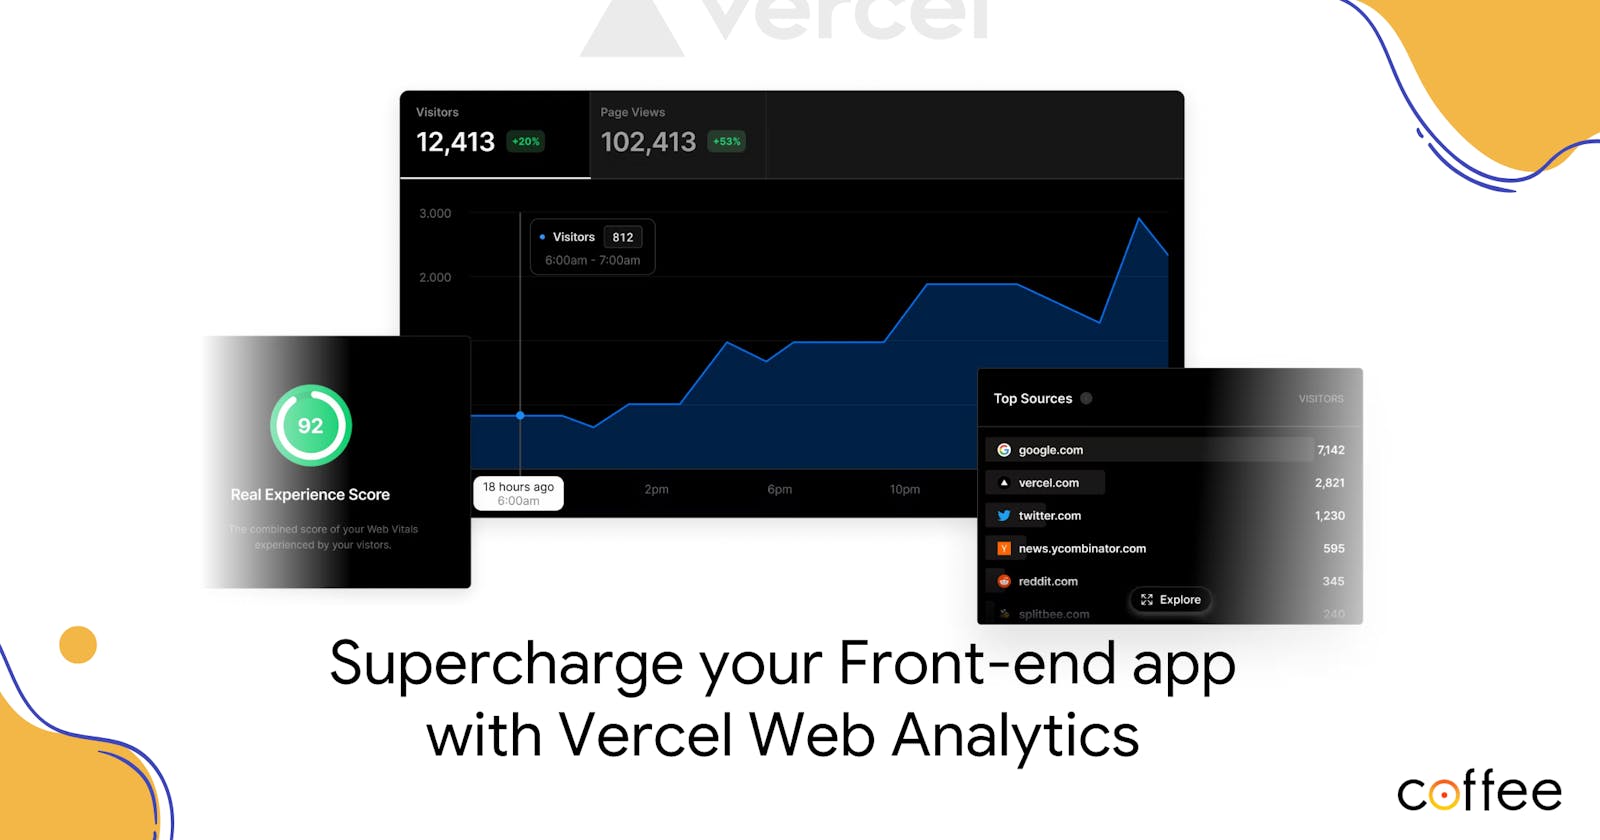 How to Supercharge your Front-end App hosted in Vercel with Web Analytics?